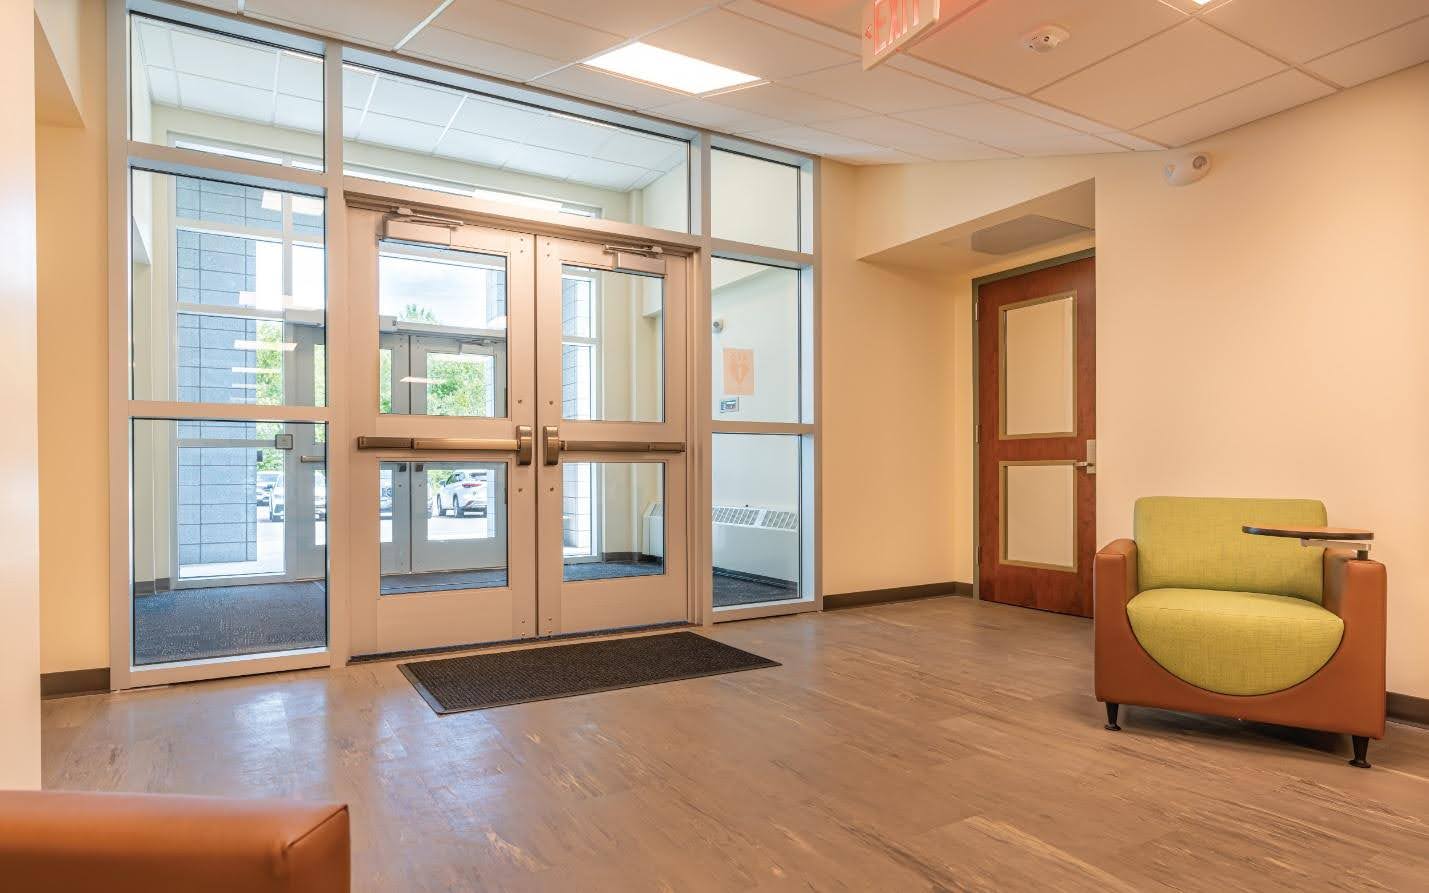 Security rated windows and doors act as the first line of defense in an active shooter event. 